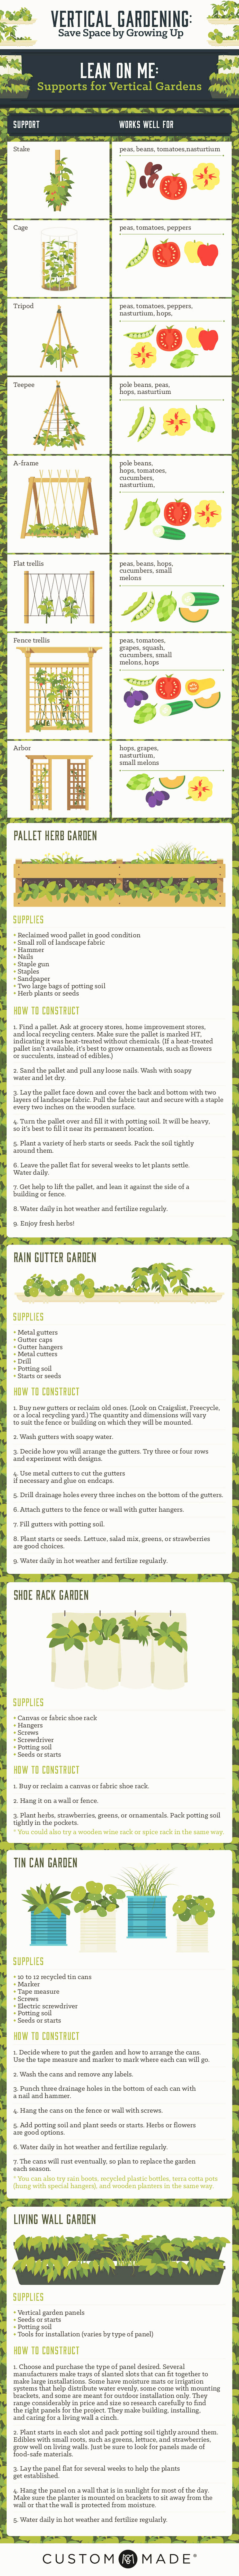 Vertical Gardening Save Space by Growing Up - Garden Infographic